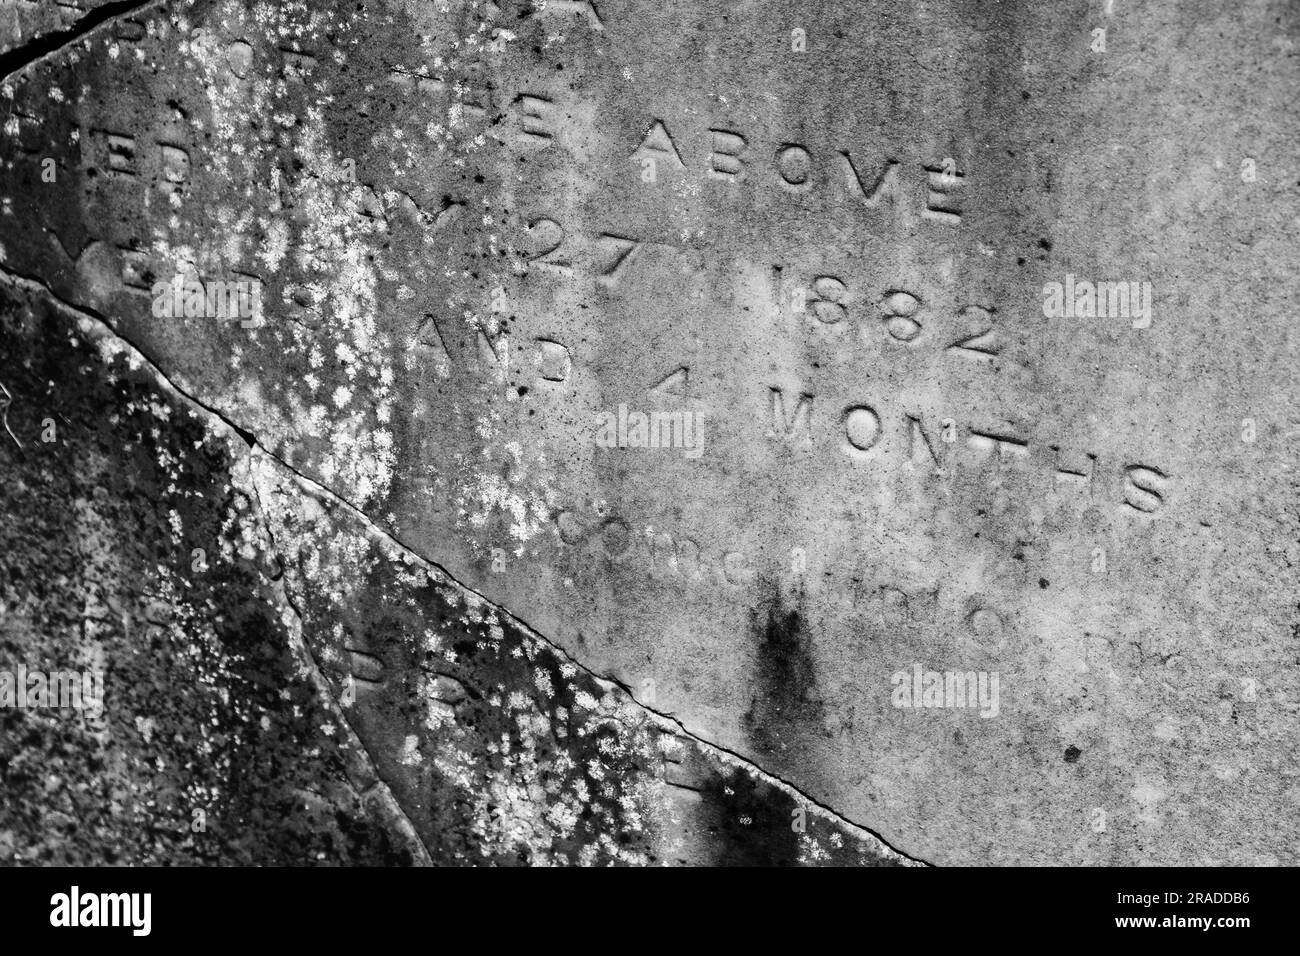 Detail from a cracked and aged Victorian era headstone for a deceased child in Bolton Street Cemetery in central Wellington, New Zealand Stock Photo